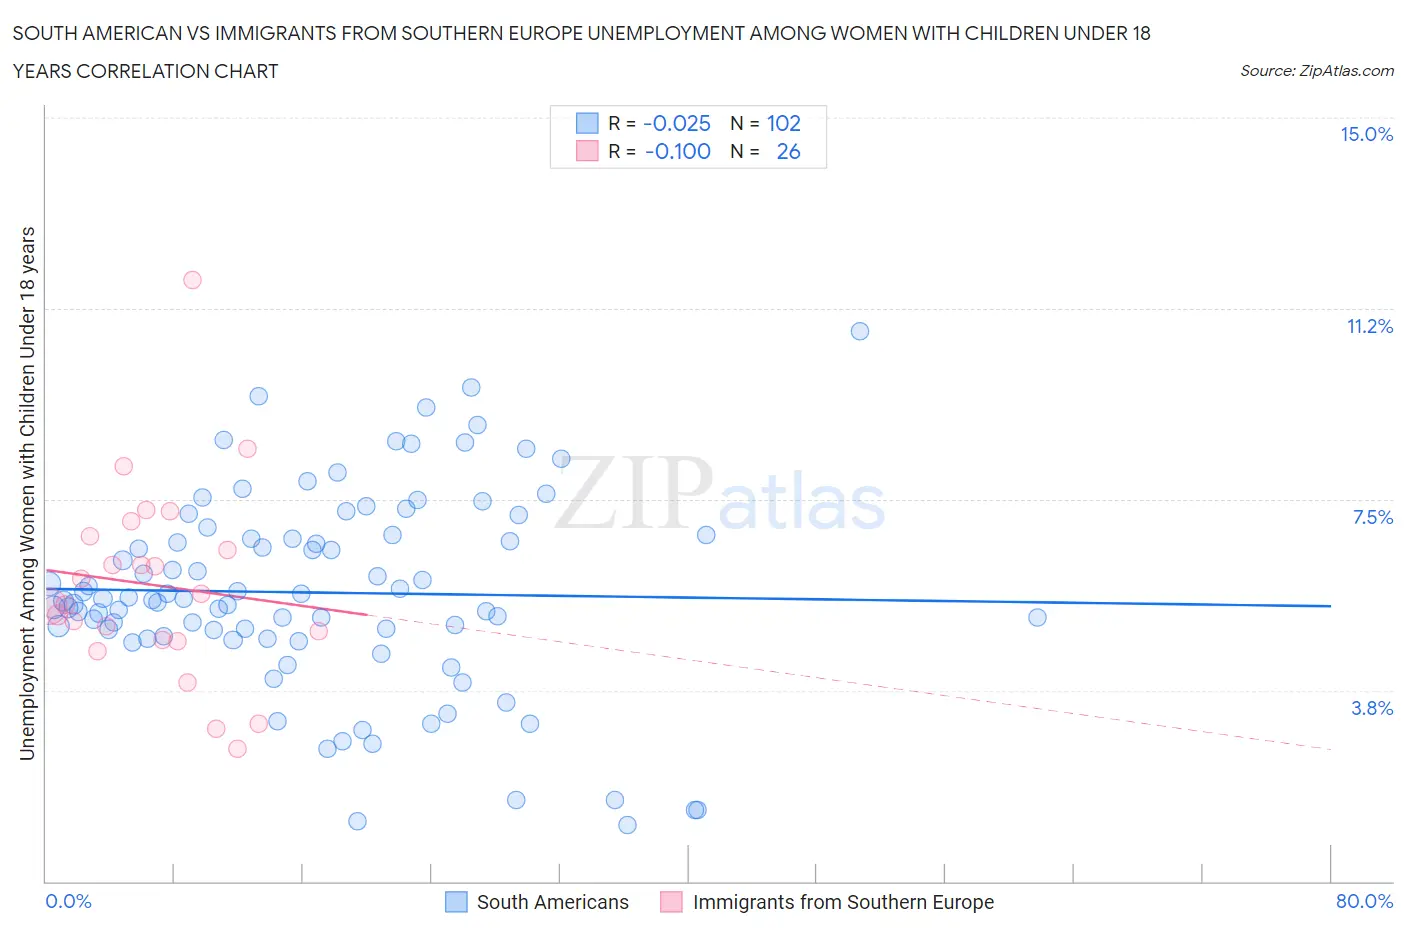 South American vs Immigrants from Southern Europe Unemployment Among Women with Children Under 18 years